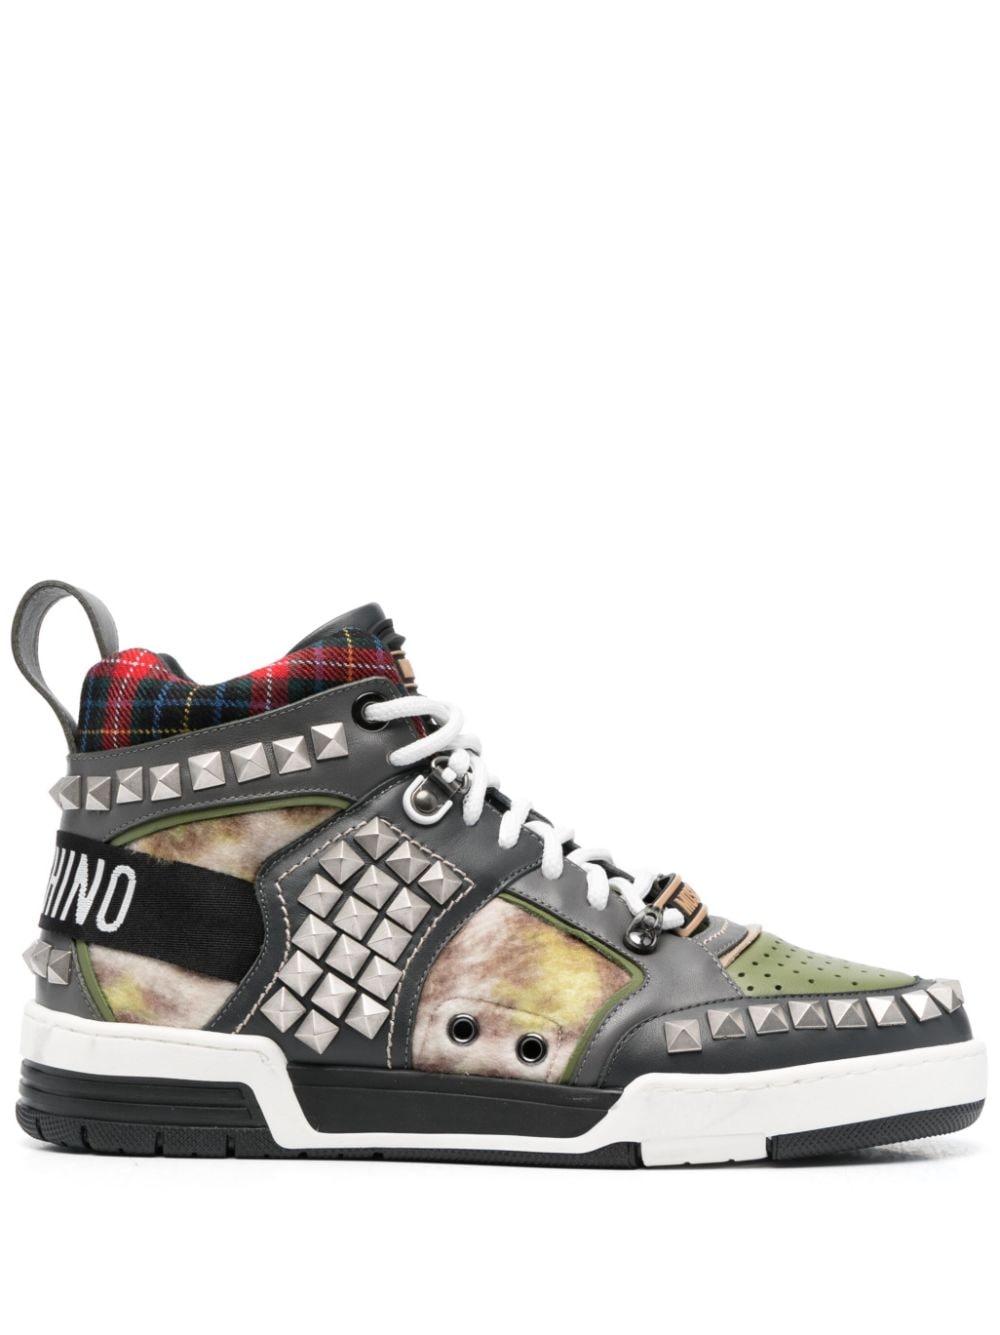 Moschino stud-embellished Patchwork Sneakers - Farfetch